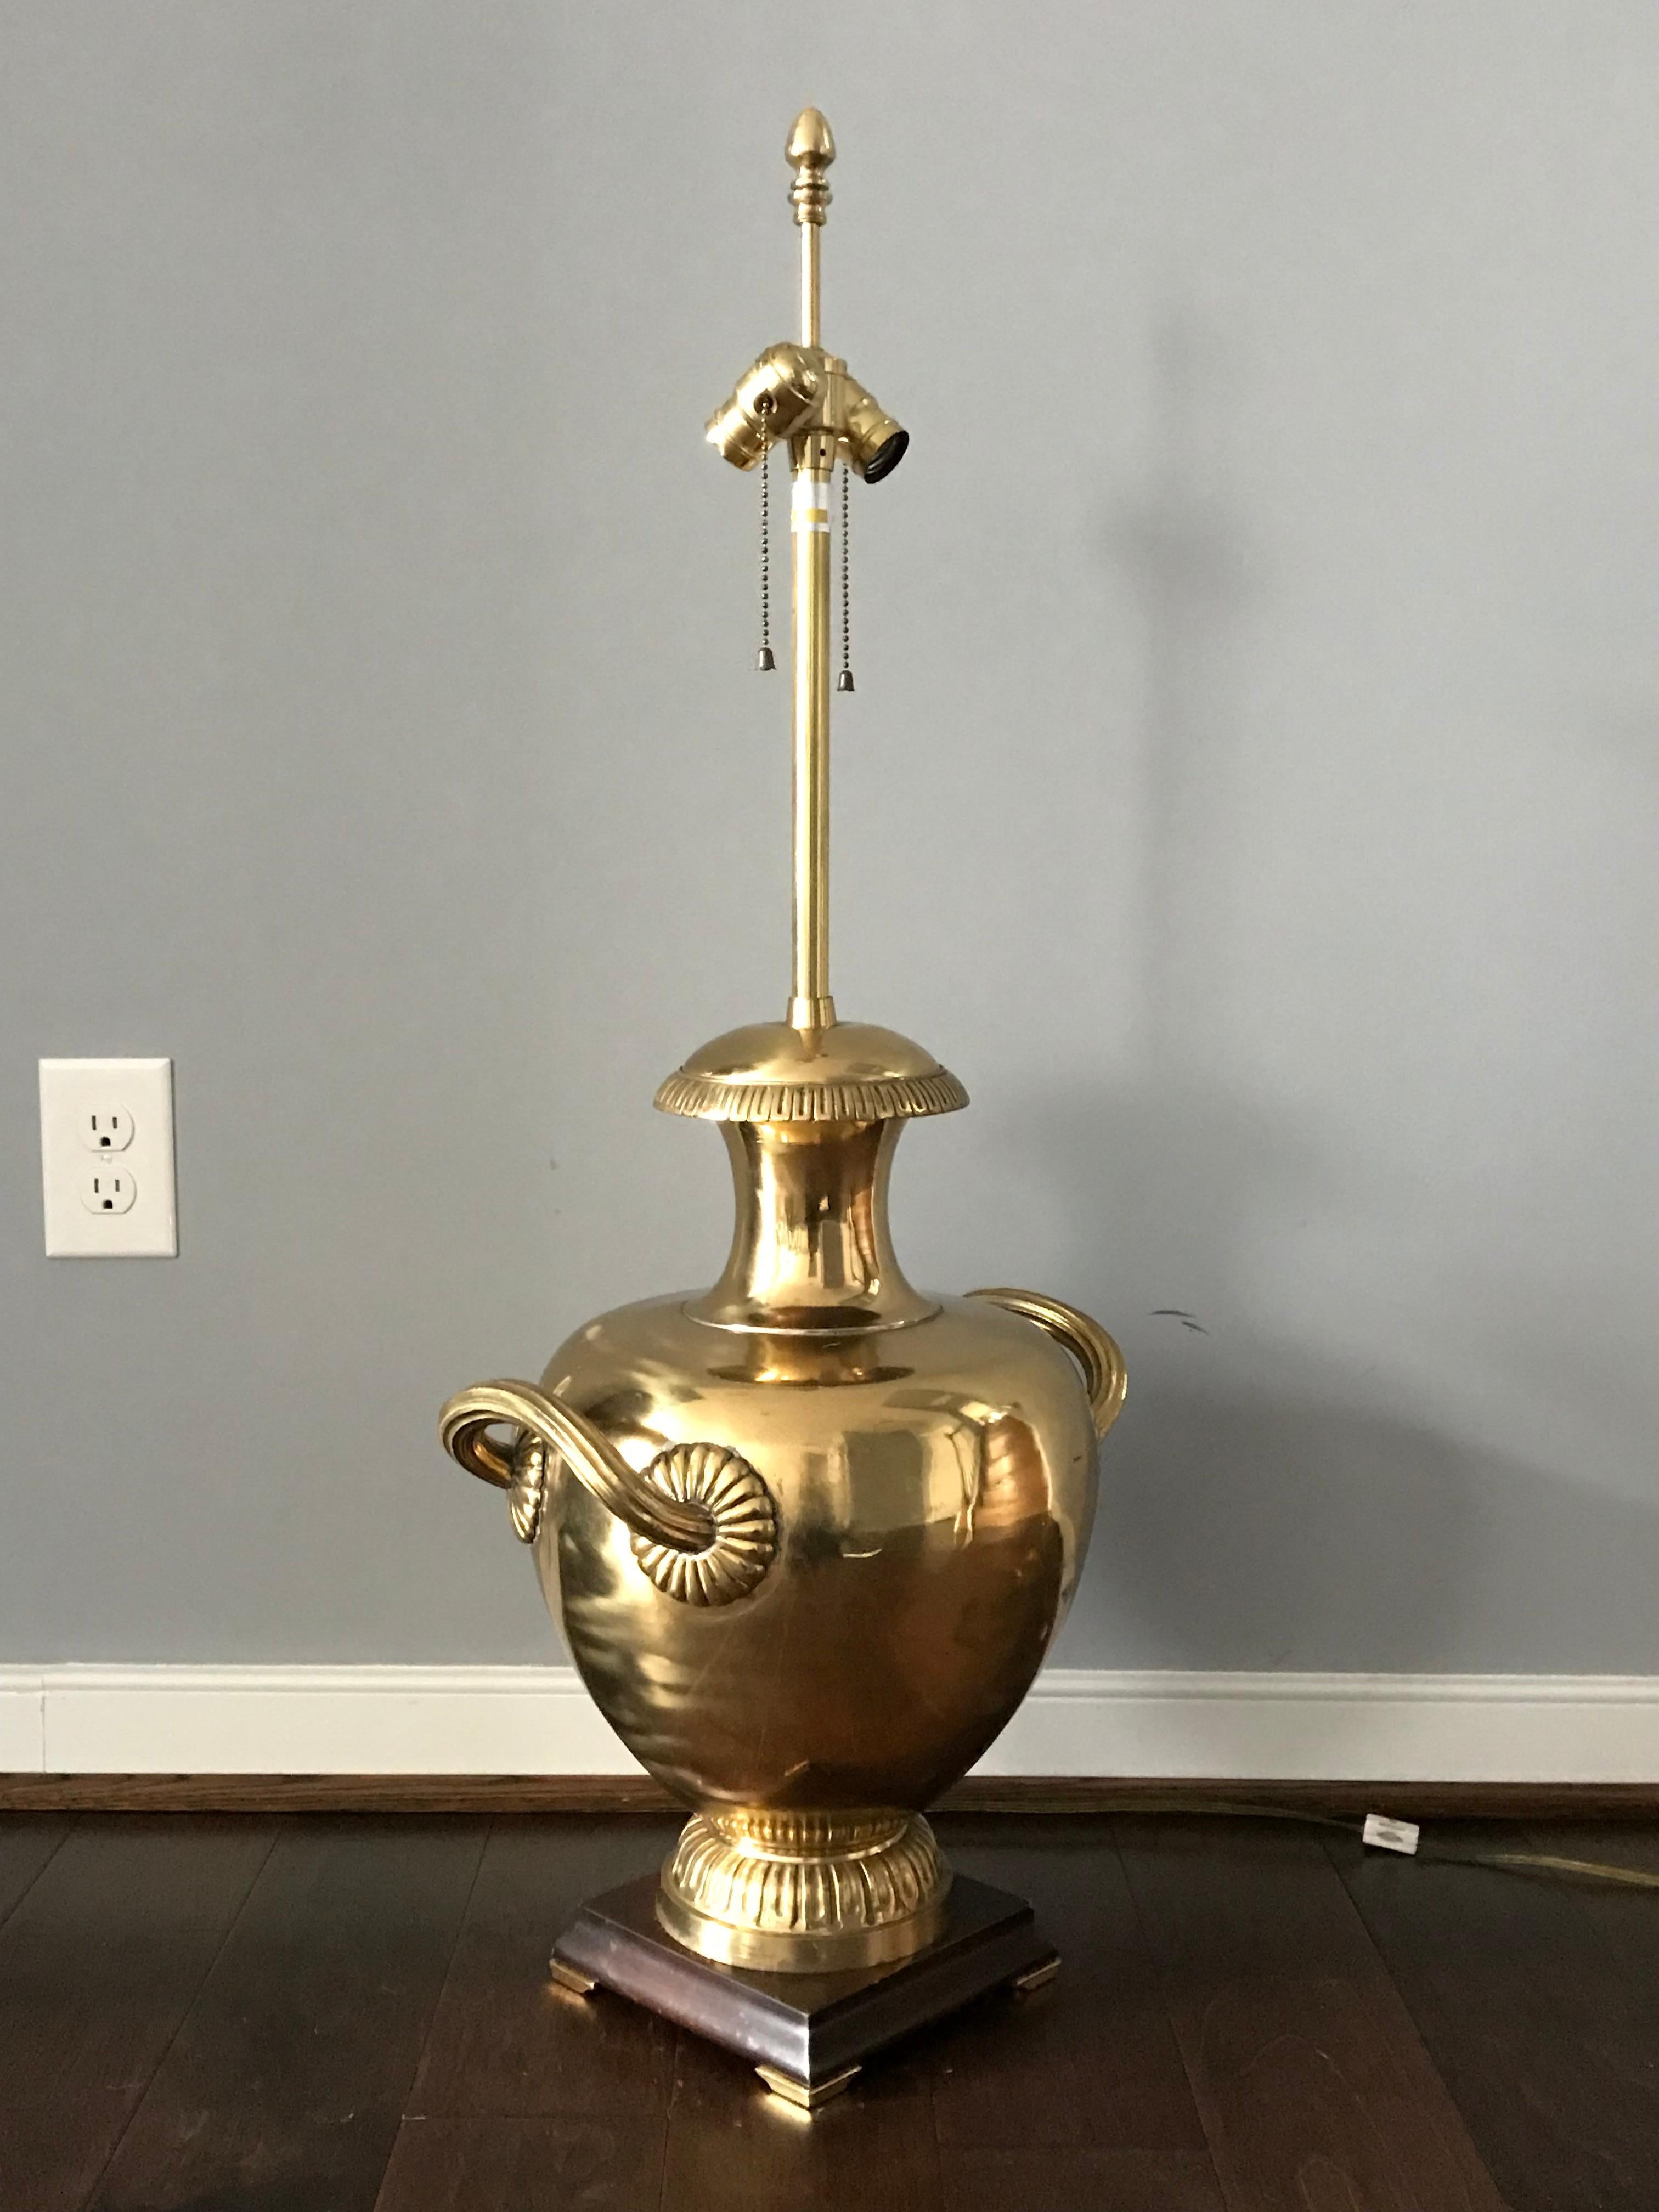 Offered is a stunning, oversized, 1970s Marbro of Los Angeles, California brass urn lamp. This piece has gorgeous detailing all over. heavily polished, double light-socket, original finial, and fabulous wood base with brass capped feet. Heavy,